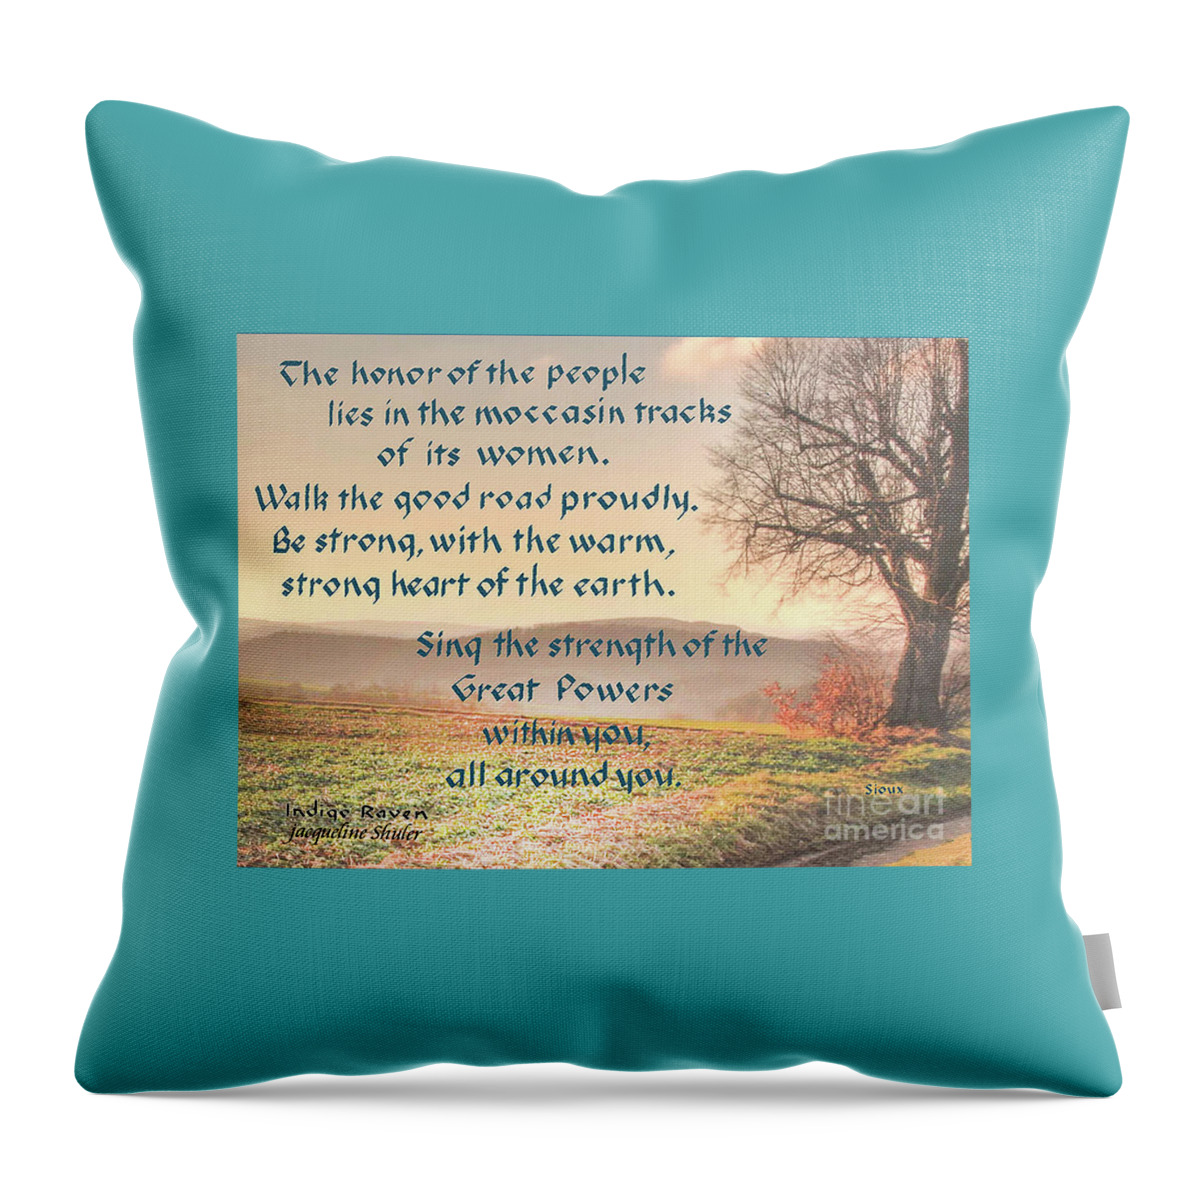 Women Throw Pillow featuring the digital art The Honor of the People is its Women by Jacqueline Shuler